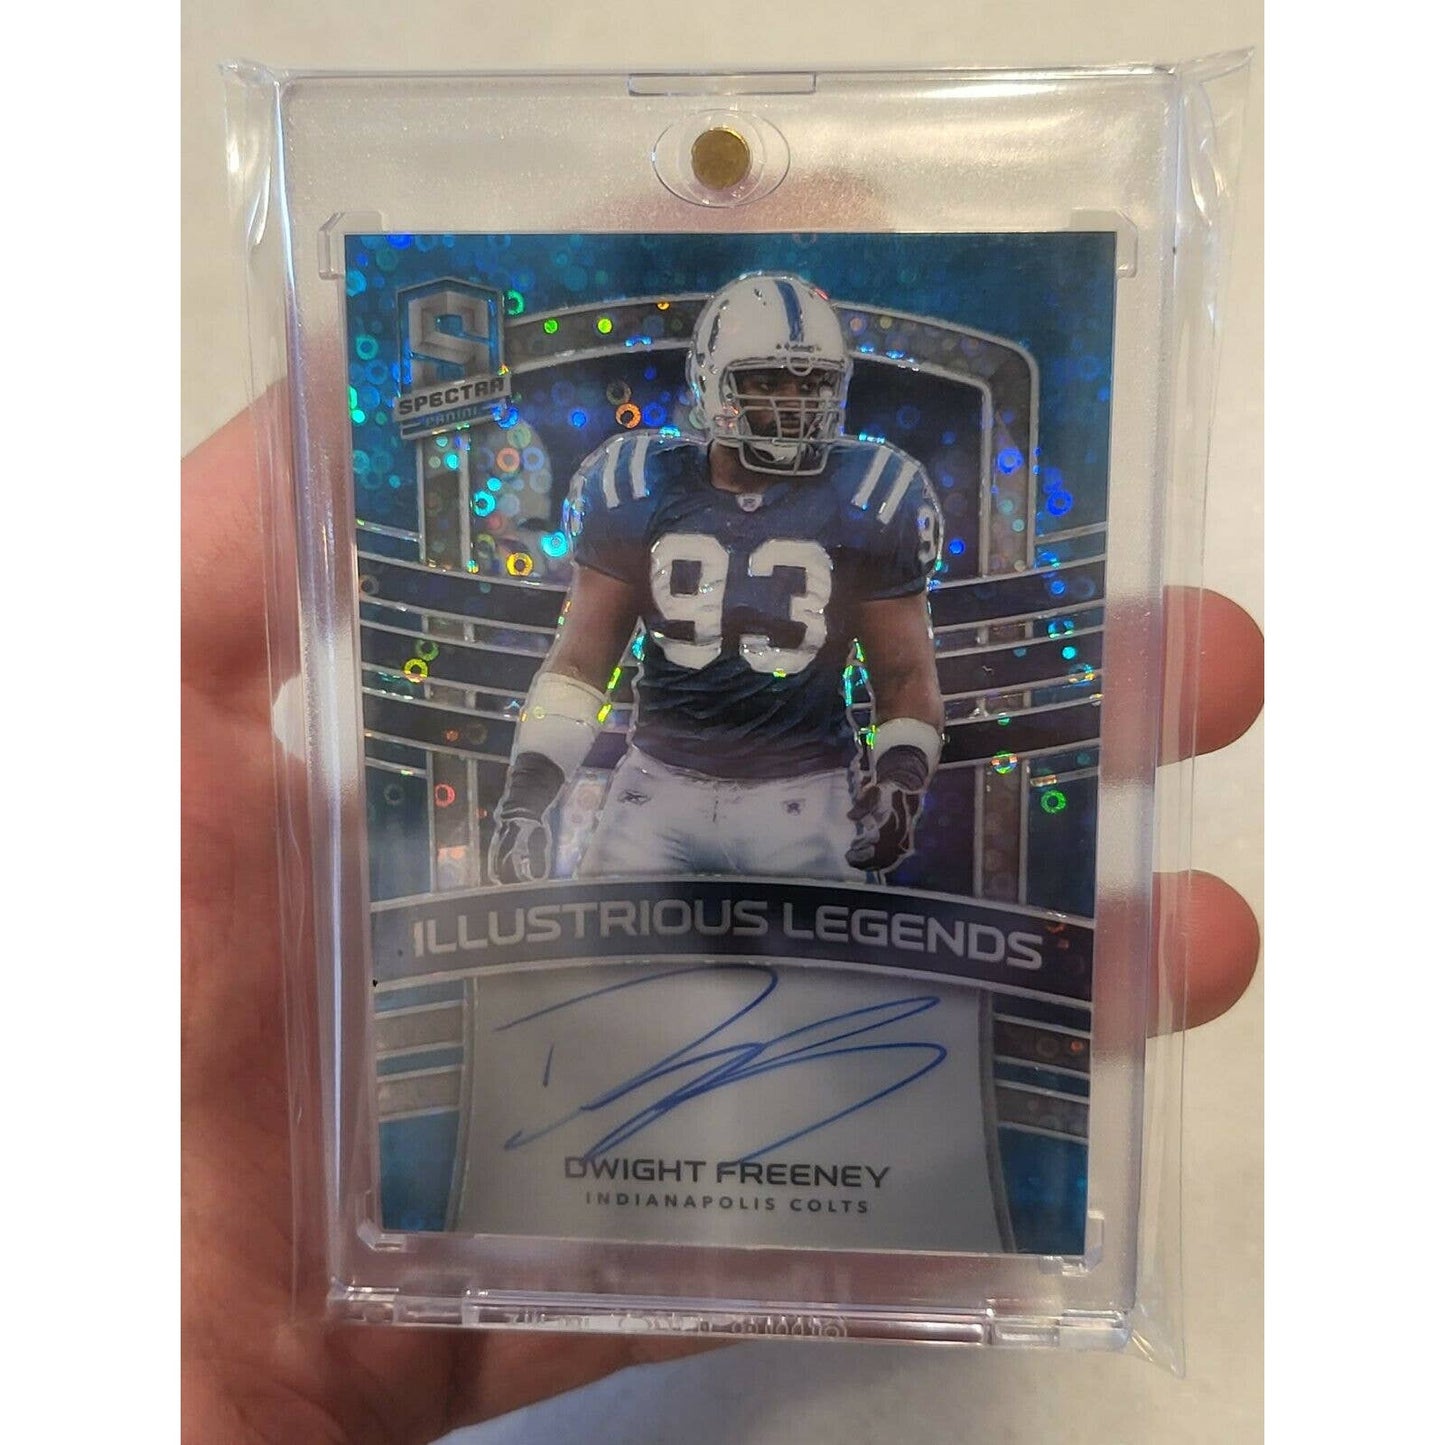 Dwight Freeney 2021 Spectra Auto /25. Indianapolis Colts. Illustrious Legends. - TreasuresEvolved